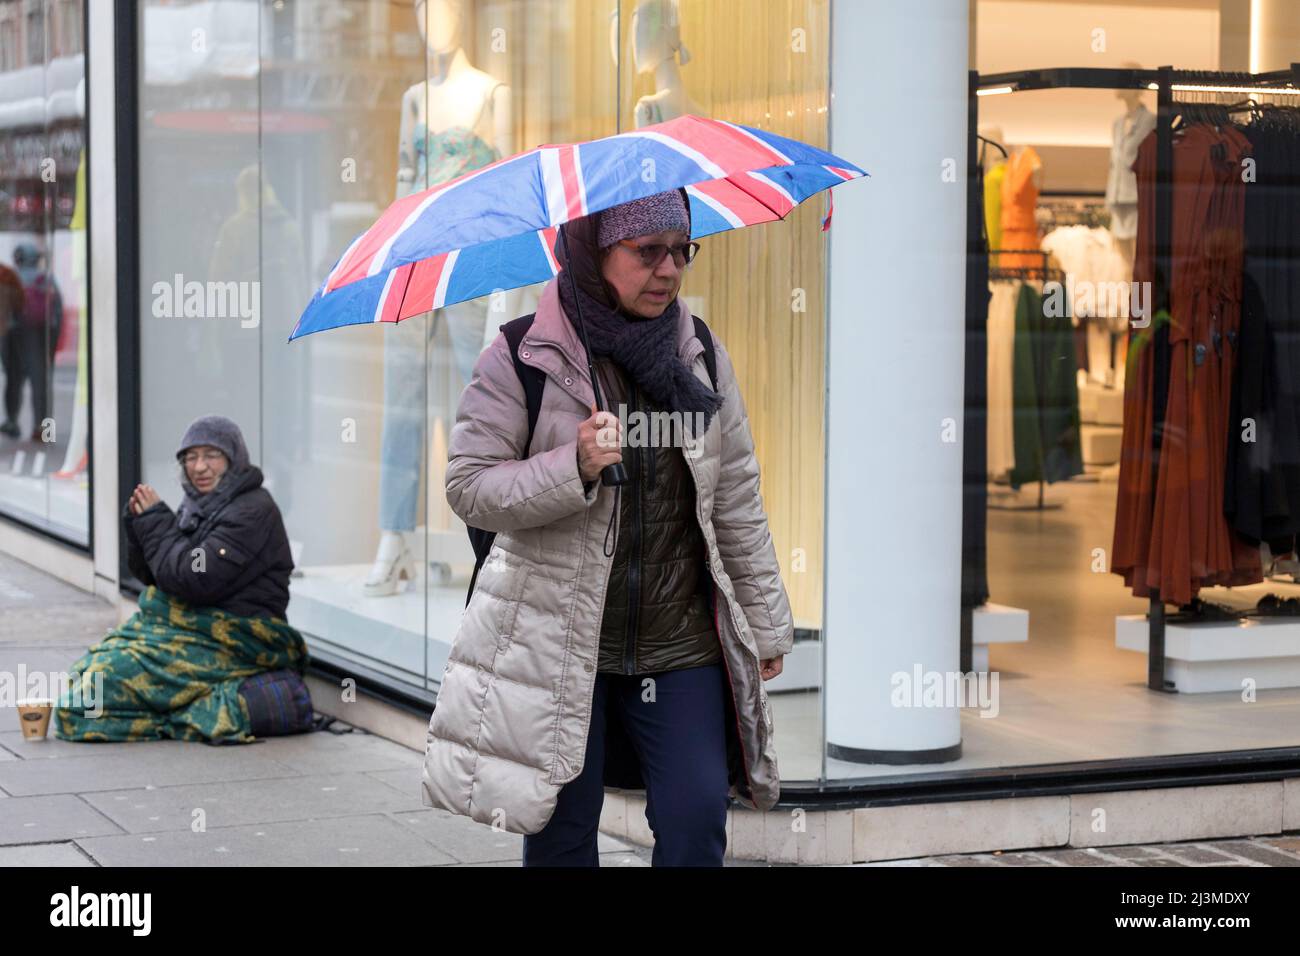 Weather is seen to be relatively dry this morning in London with occasional drizzles as morning commuters pass by Tottenham Court Road and Oxford Circ Stock Photo